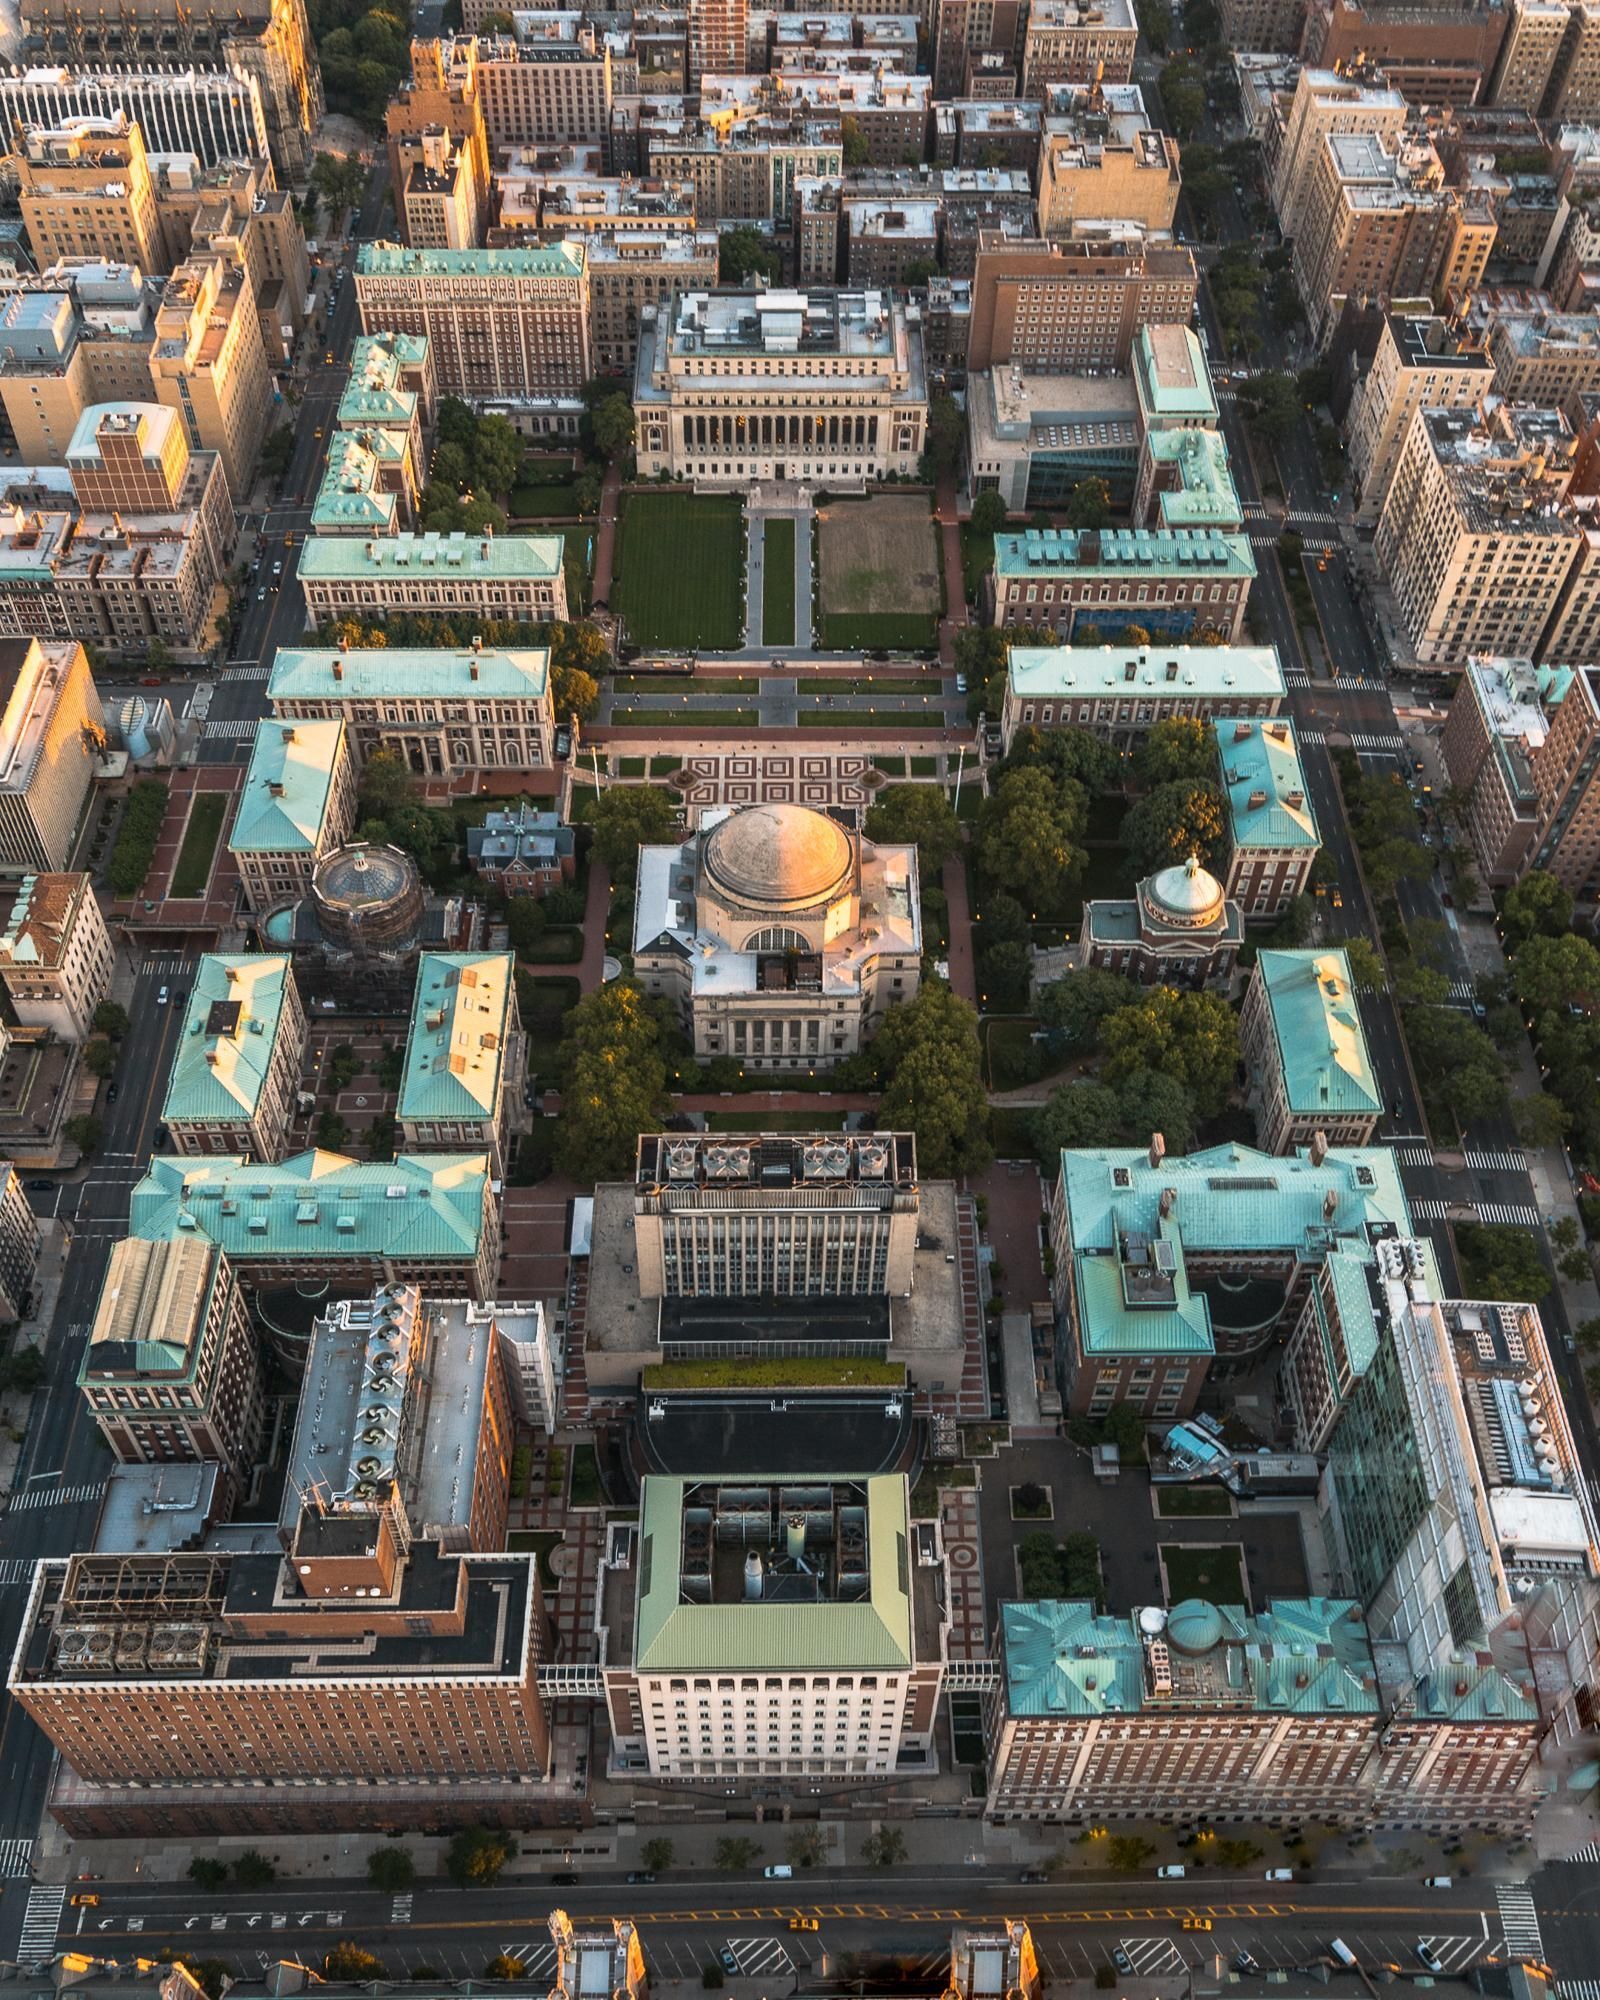 Aerial view of a large university campus with a dome centered in the middle. - Columbia University